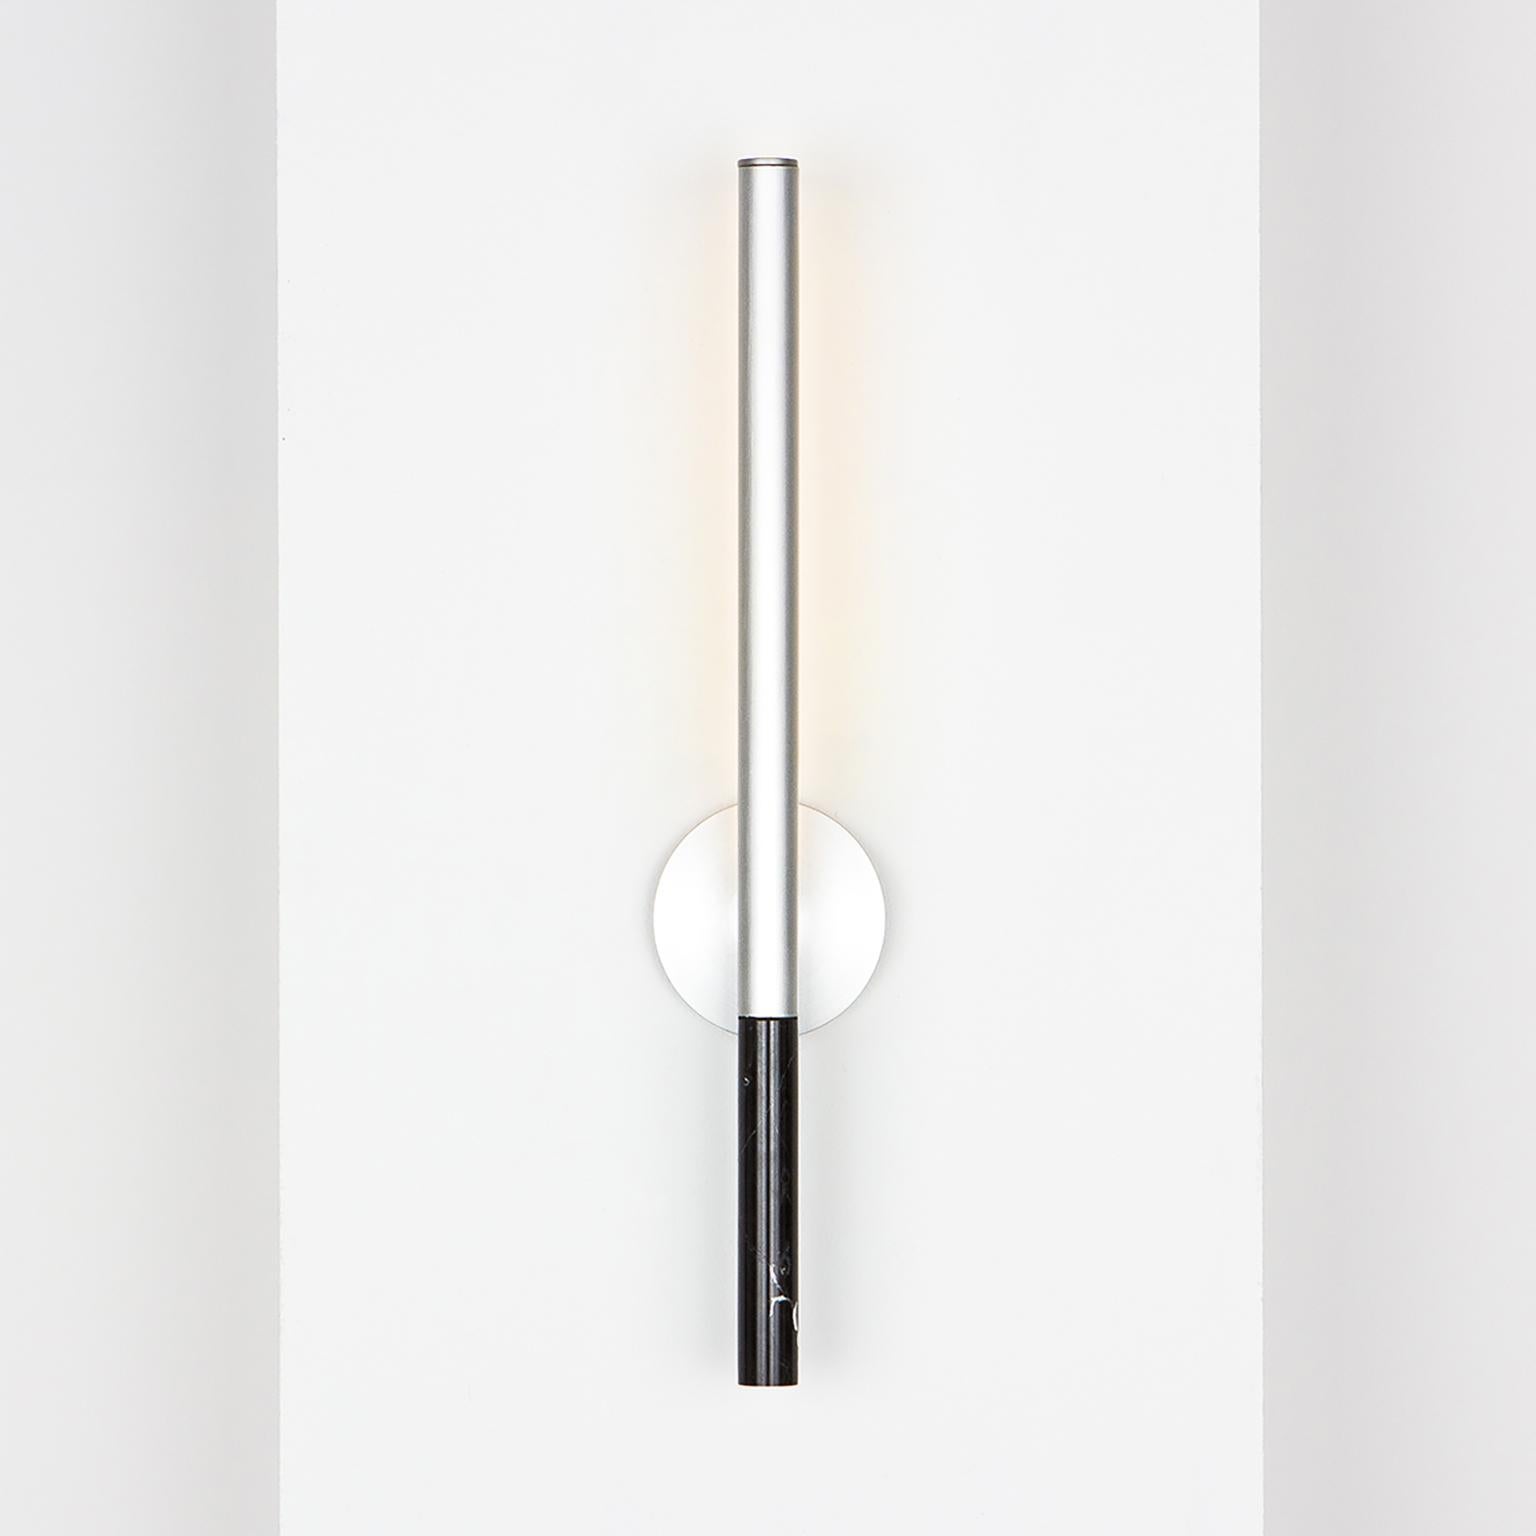 Formation wall sconce is a luxury wall mounted LED light fixture ideally suited for hallways, powder rooms and other domestic and commercial spaces that require an accent light.
The core design is a set of interlocking extruded aluminum profiles,